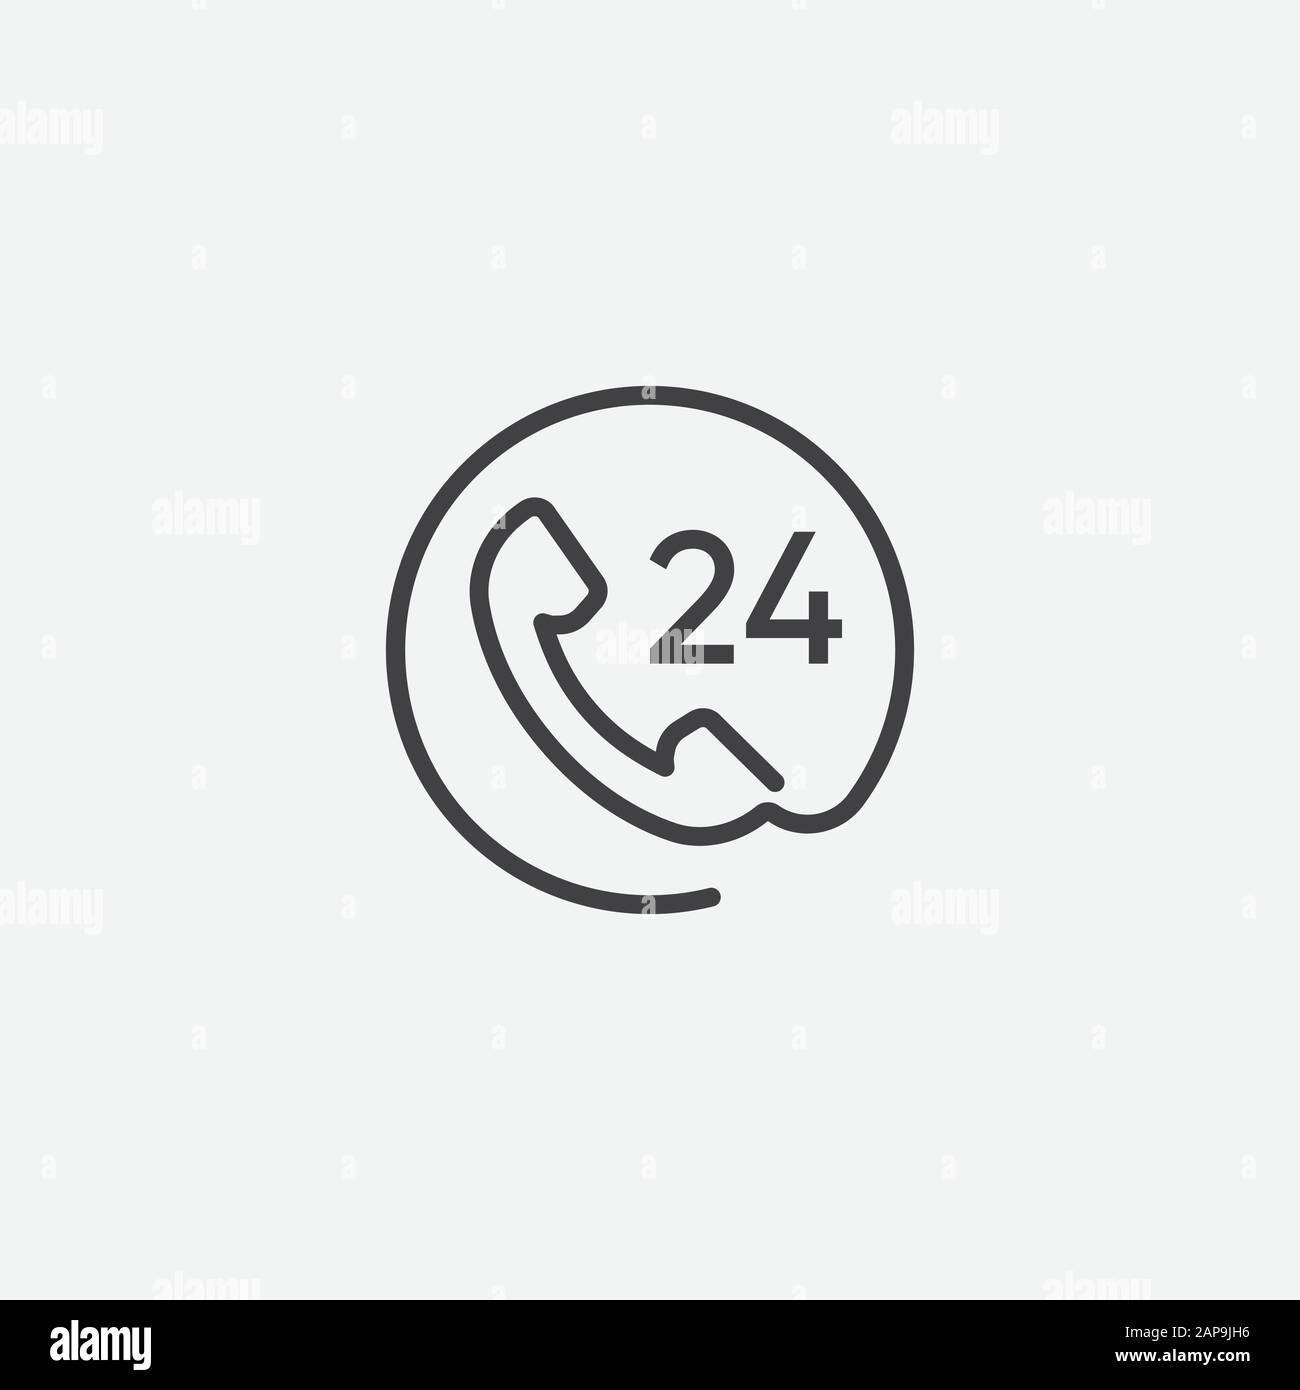 Call 24 icon vector illustration, 24 hour call service, Twenty four hour service linear flat design, 24h Support Simple linear Design, All day customer support call center icon, Telephone support 24 hours symbol Stock Vector